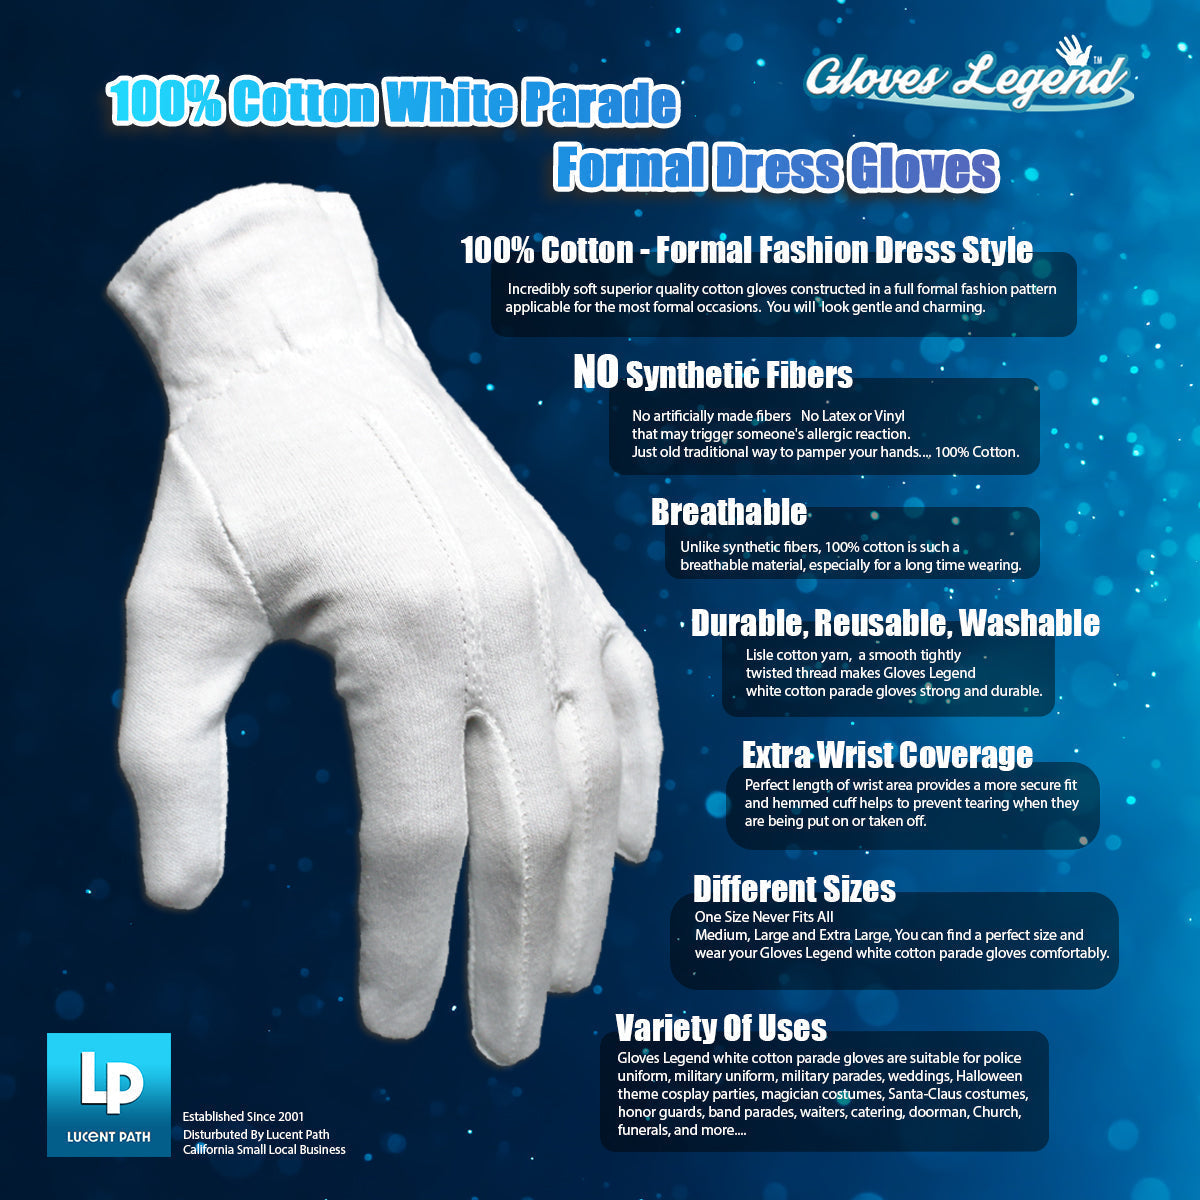 Large - 6 Pairs (12 Gloves) Gloves Legend 100% White Cotton Marching Parade Formal Dress Gloves